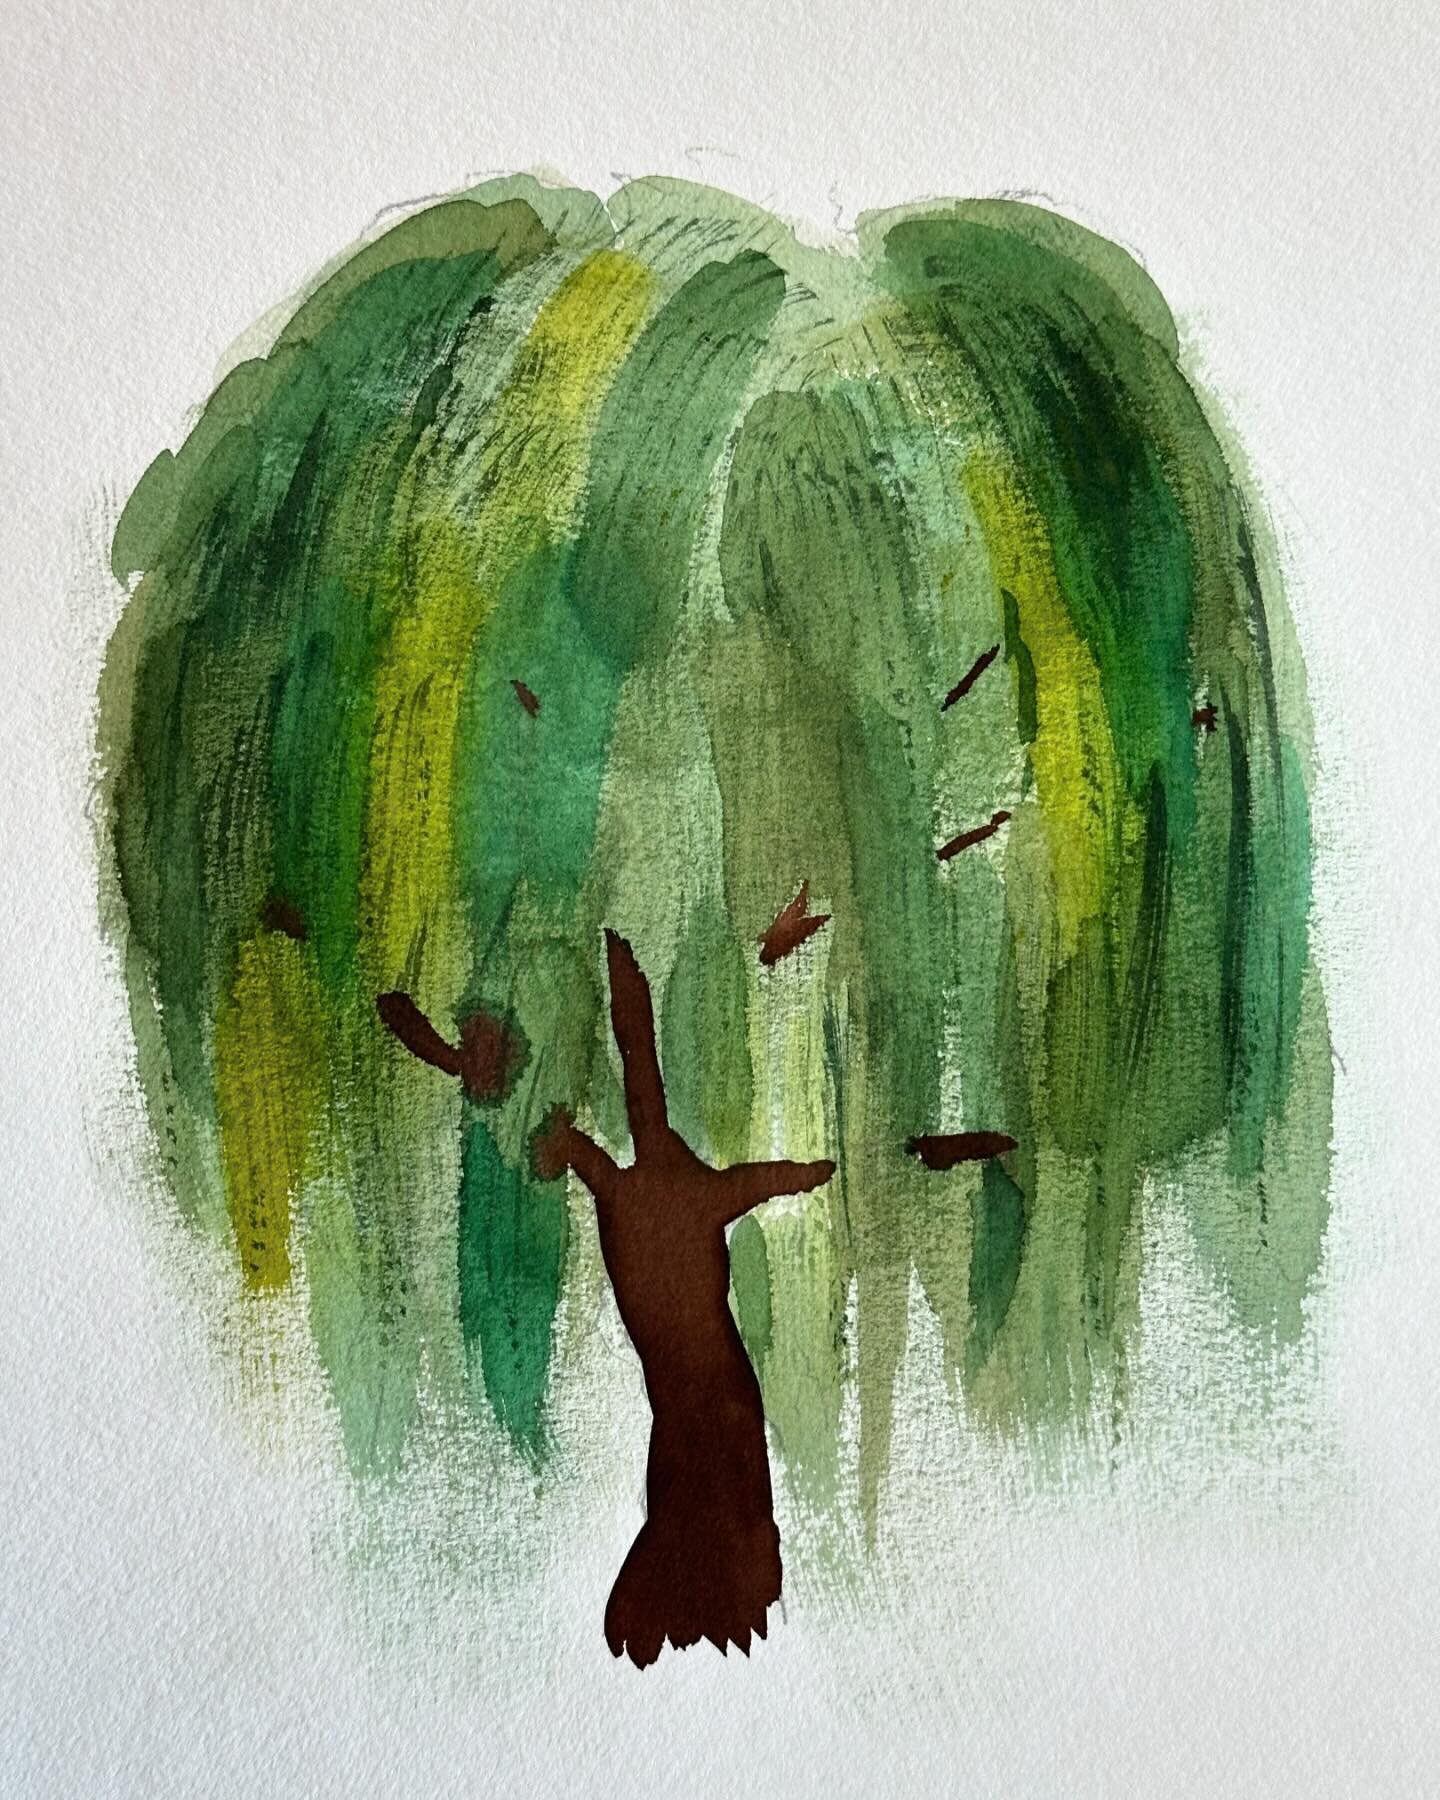 I painted the willow tree from @sarahdandelioncray&rsquo;s Landscape Workbook. I felt like I was having trouble getting the leaves how I wanted them with my dry brush. 

#letsmakeartwatercolor #letsmakeart #watercolor #watercolorpainting